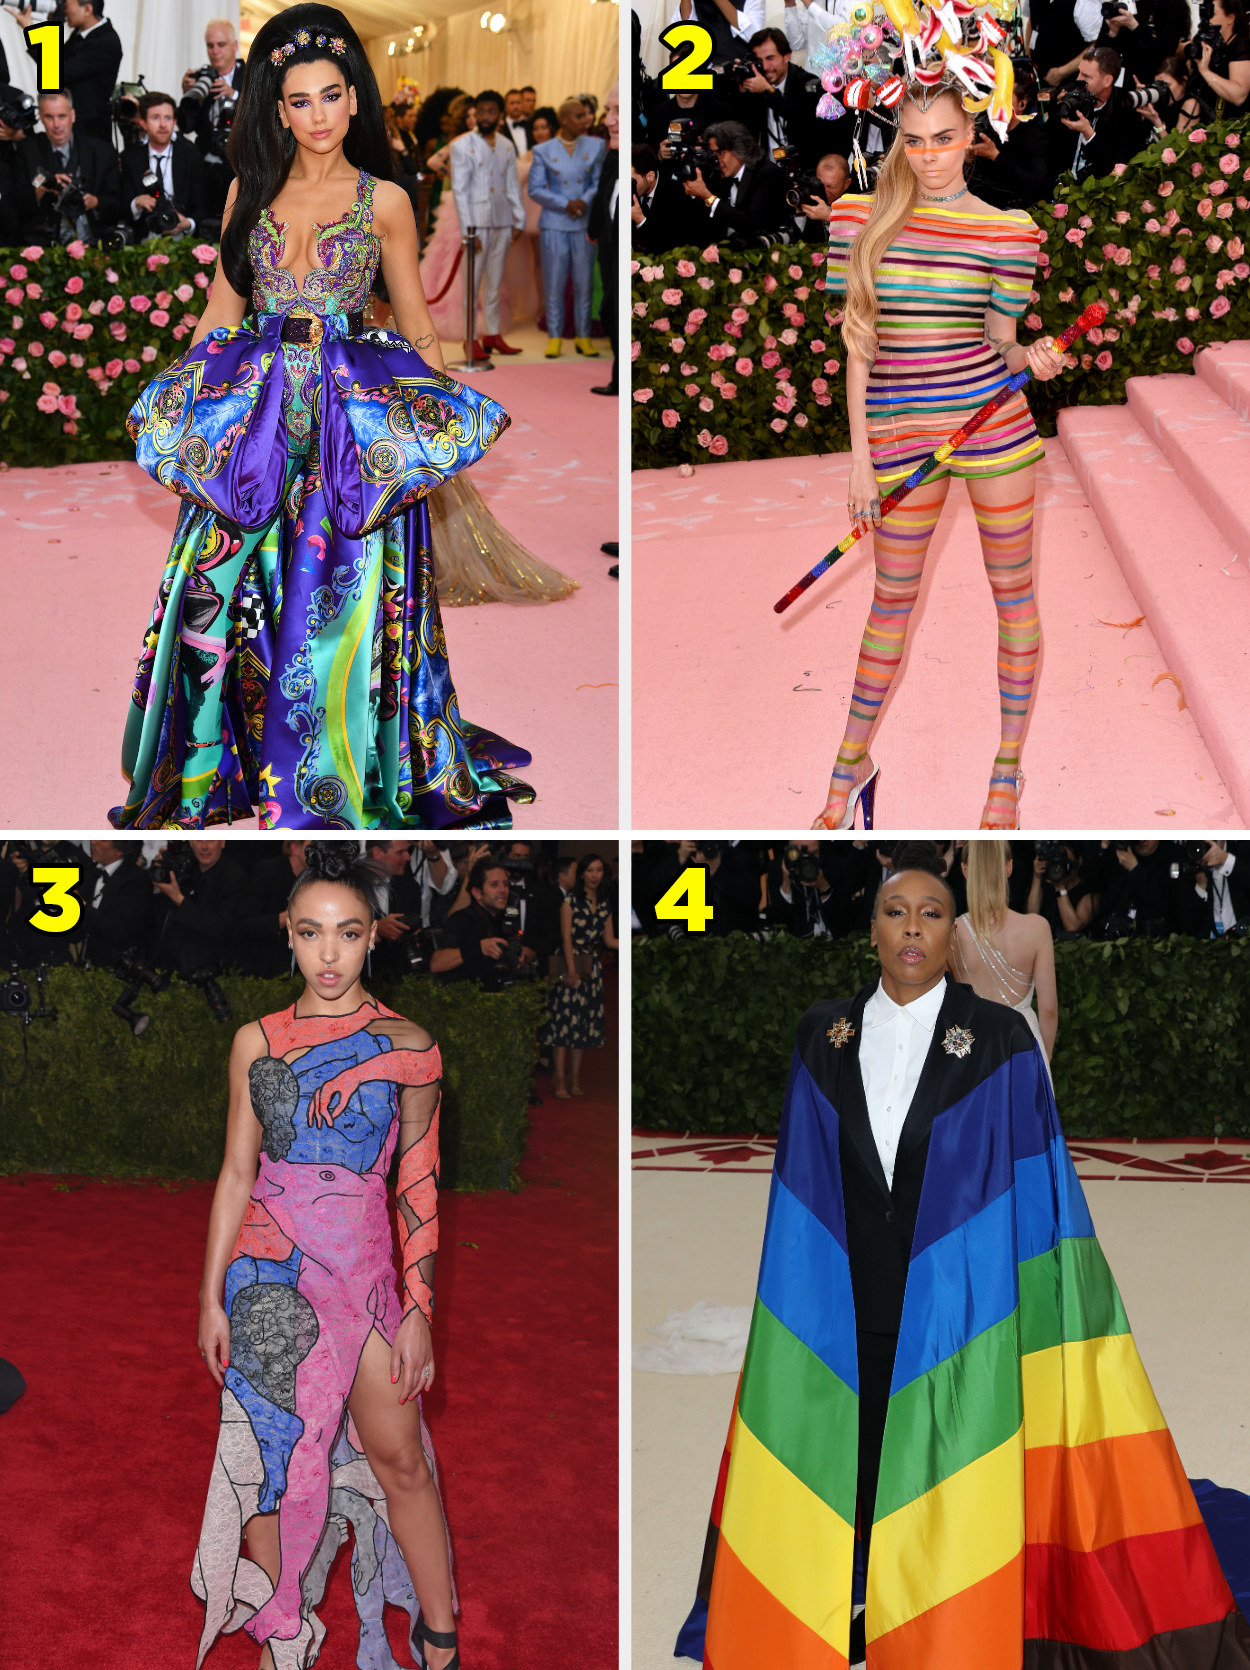 1. A sleeveless gown with a peplum and a very vibrant print. 2. A sheer collection of ribbons all the way down the body. 3.A multicolored gown with body parts in each color. 4. The pride flag worn over a blazer.